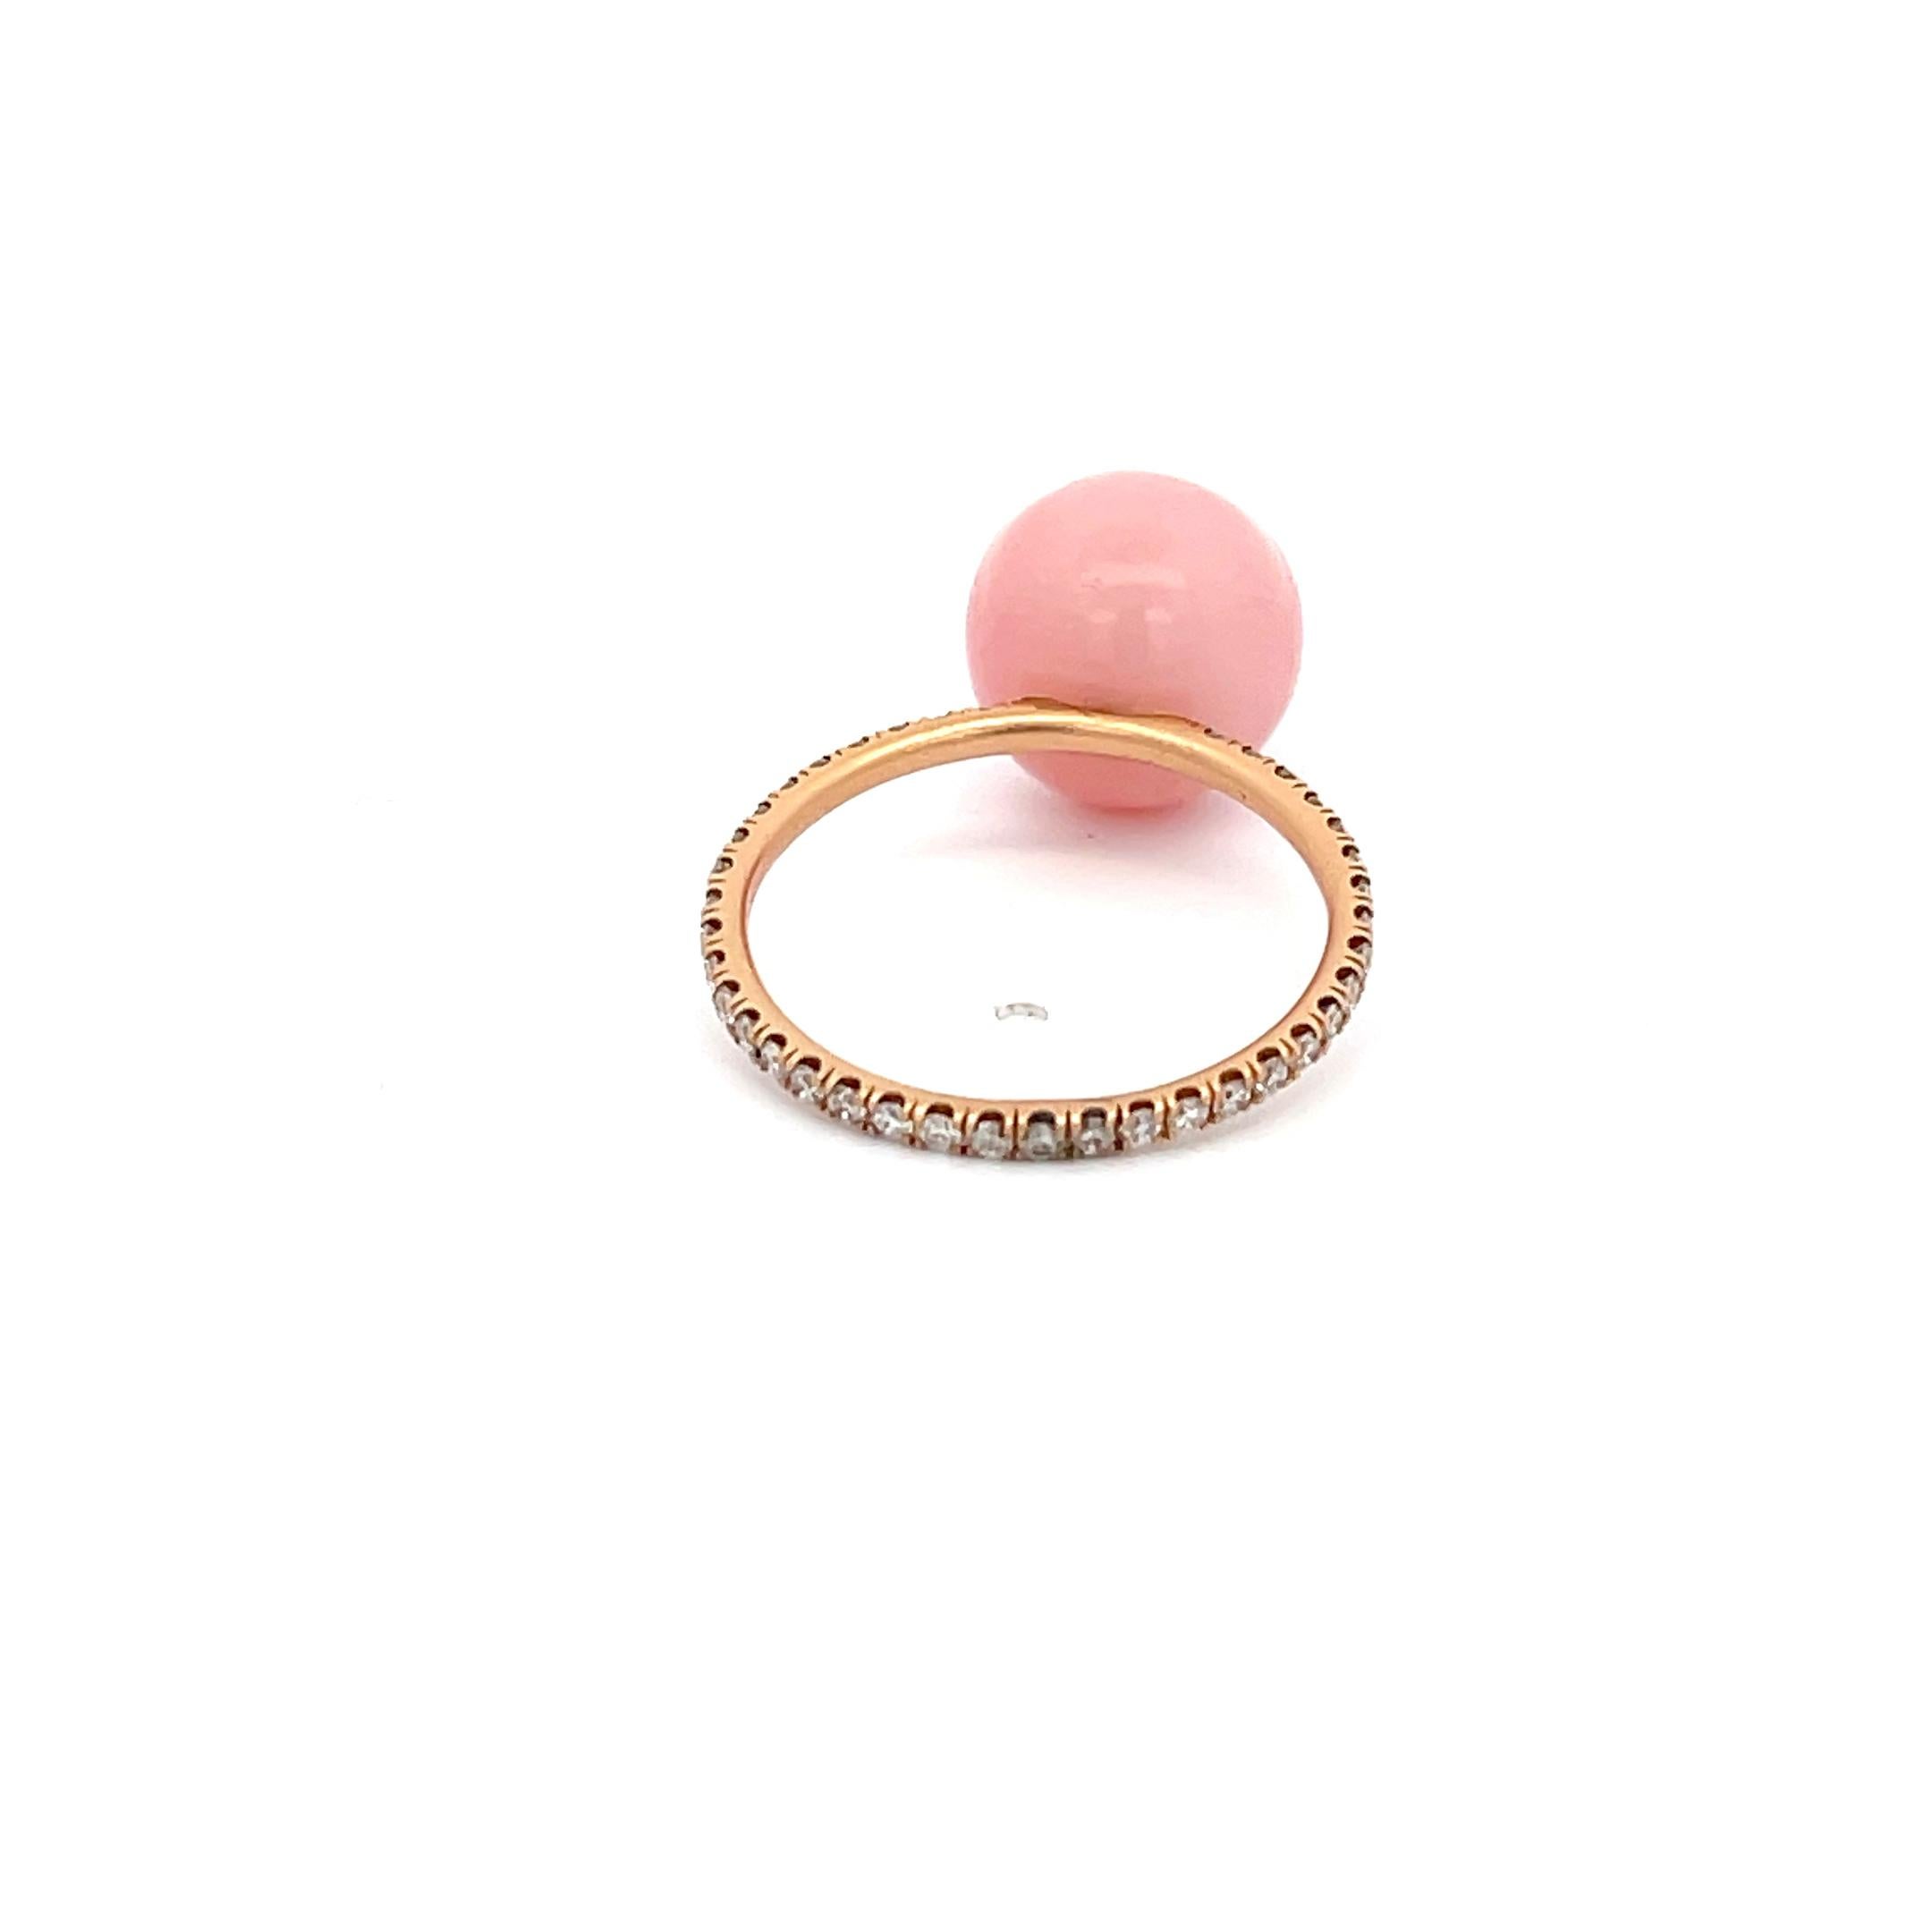 Round Cut Irene Neuwirth Pink Opal Diamond Ring 18K Rose Gold For Sale